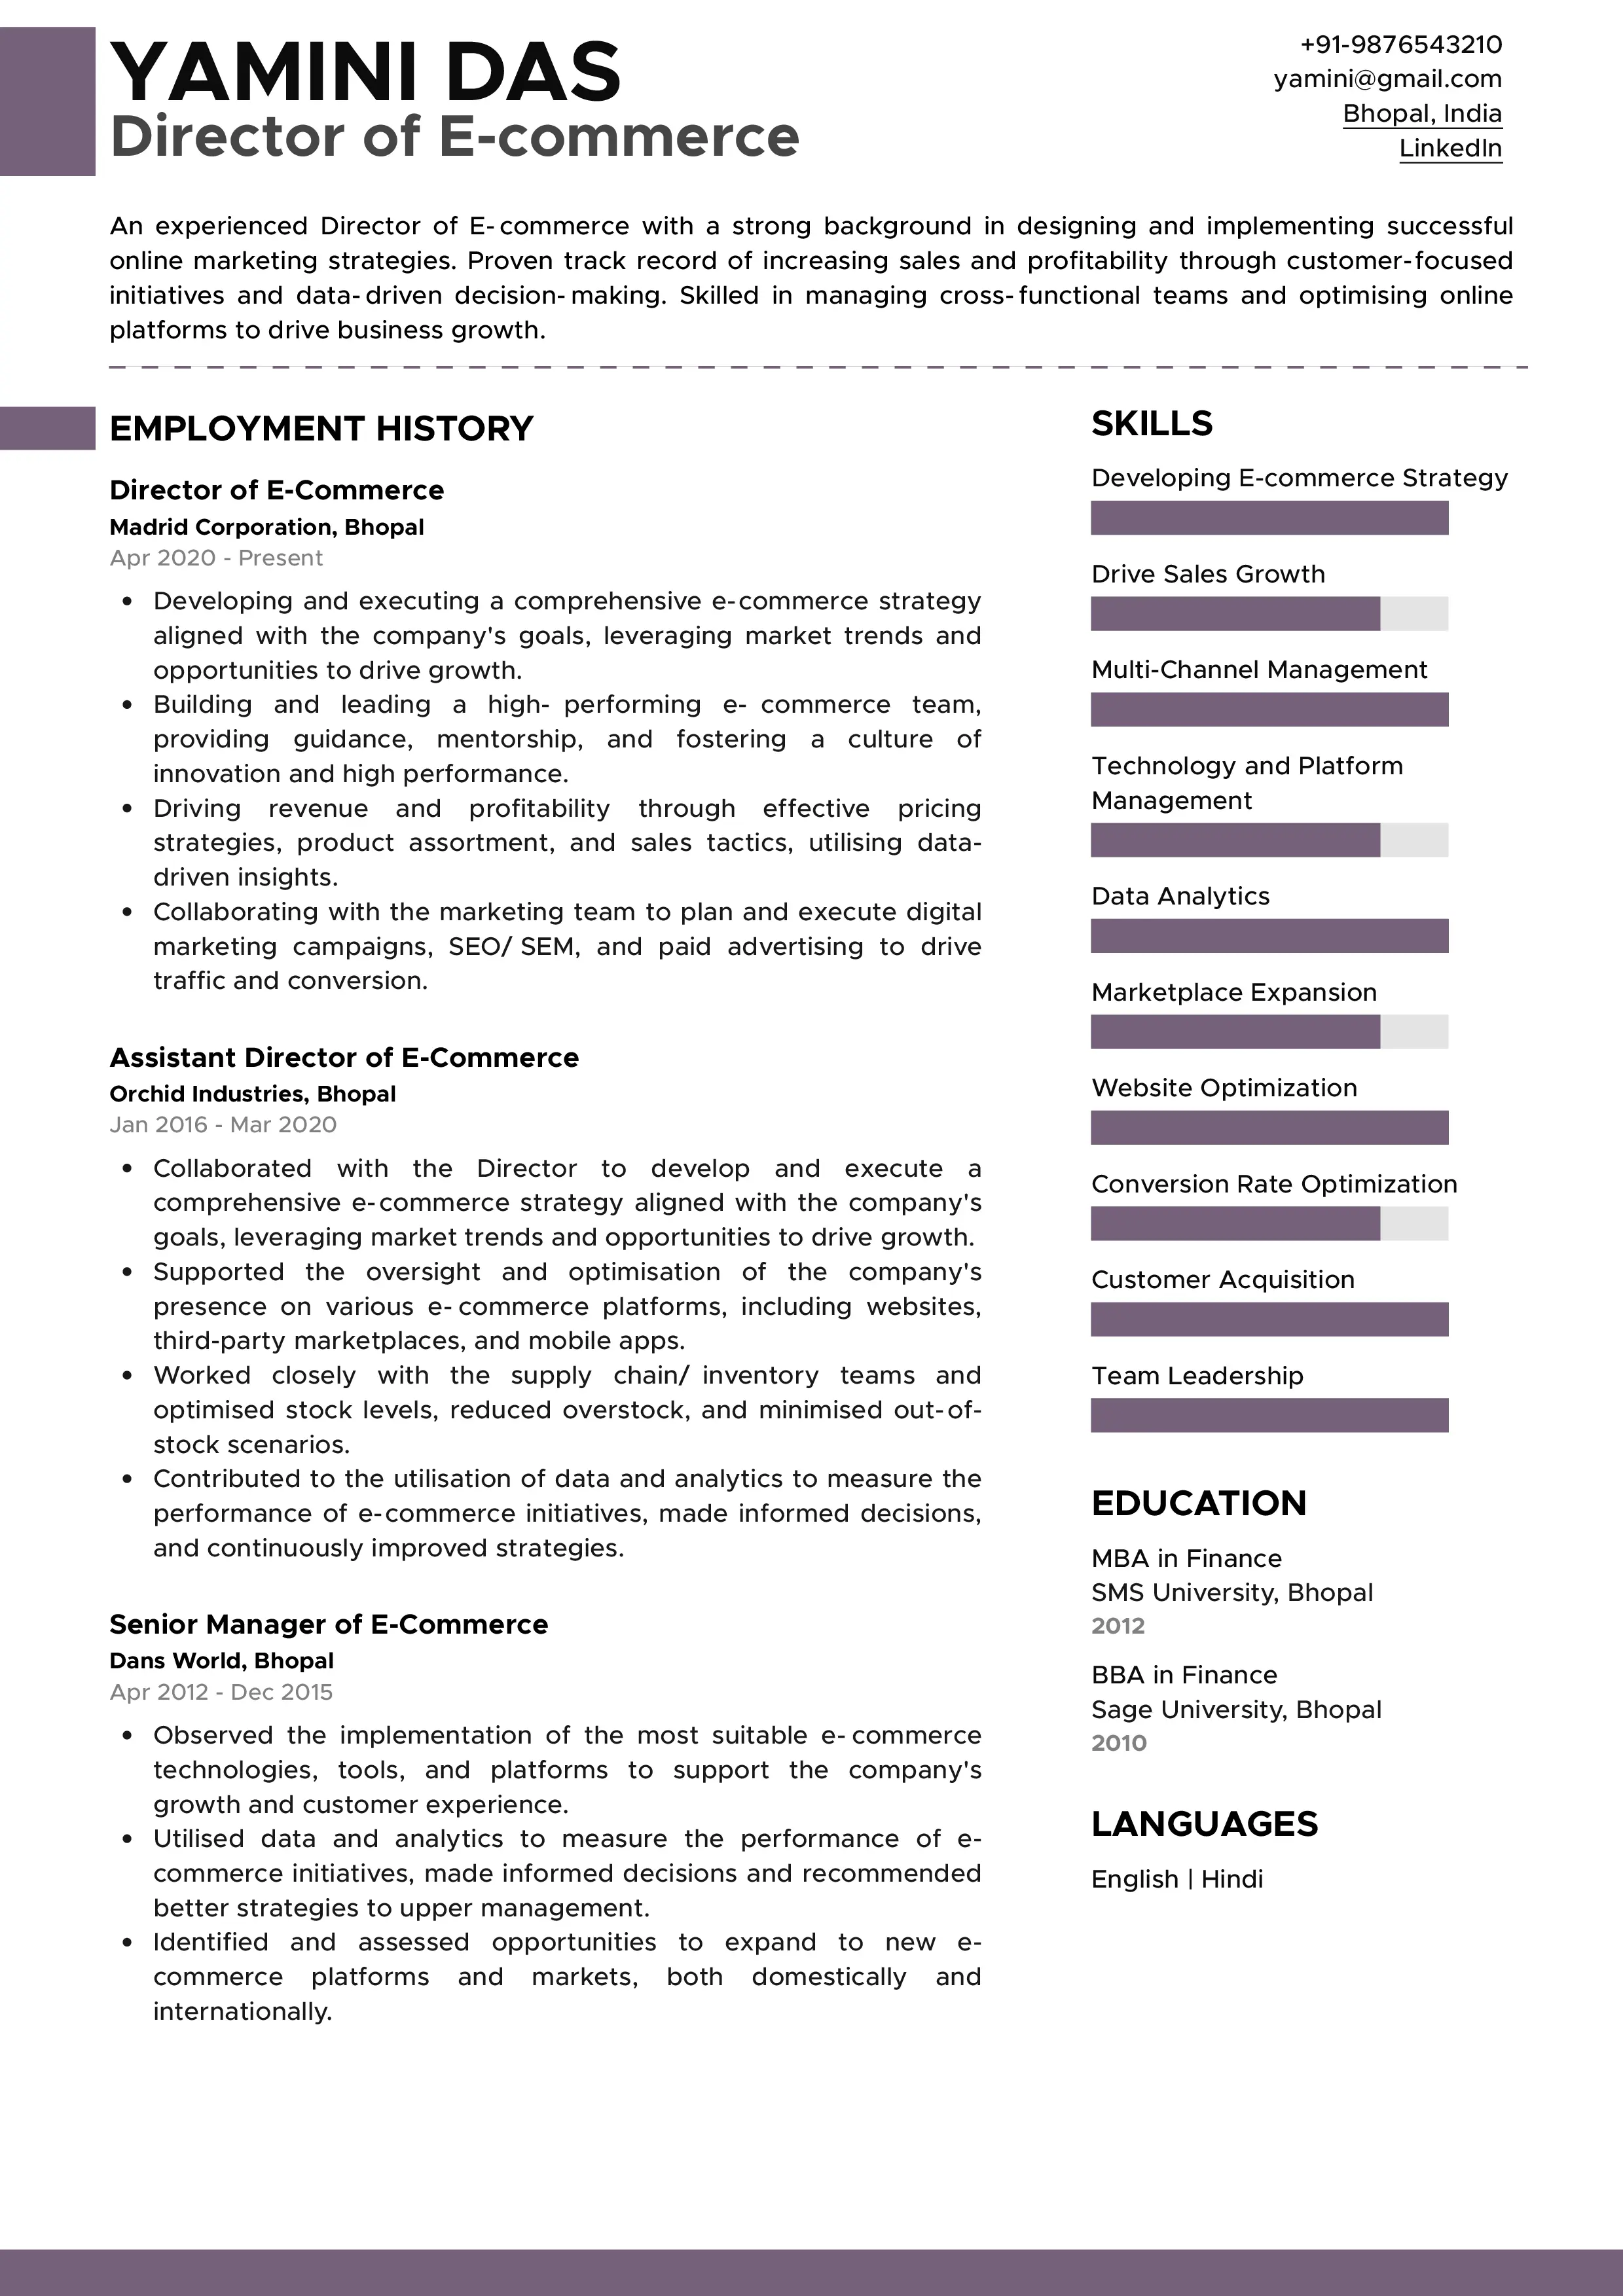 Sample Resume of Director of E-Commerce | Free Resume Templates & Samples on Resumod.co